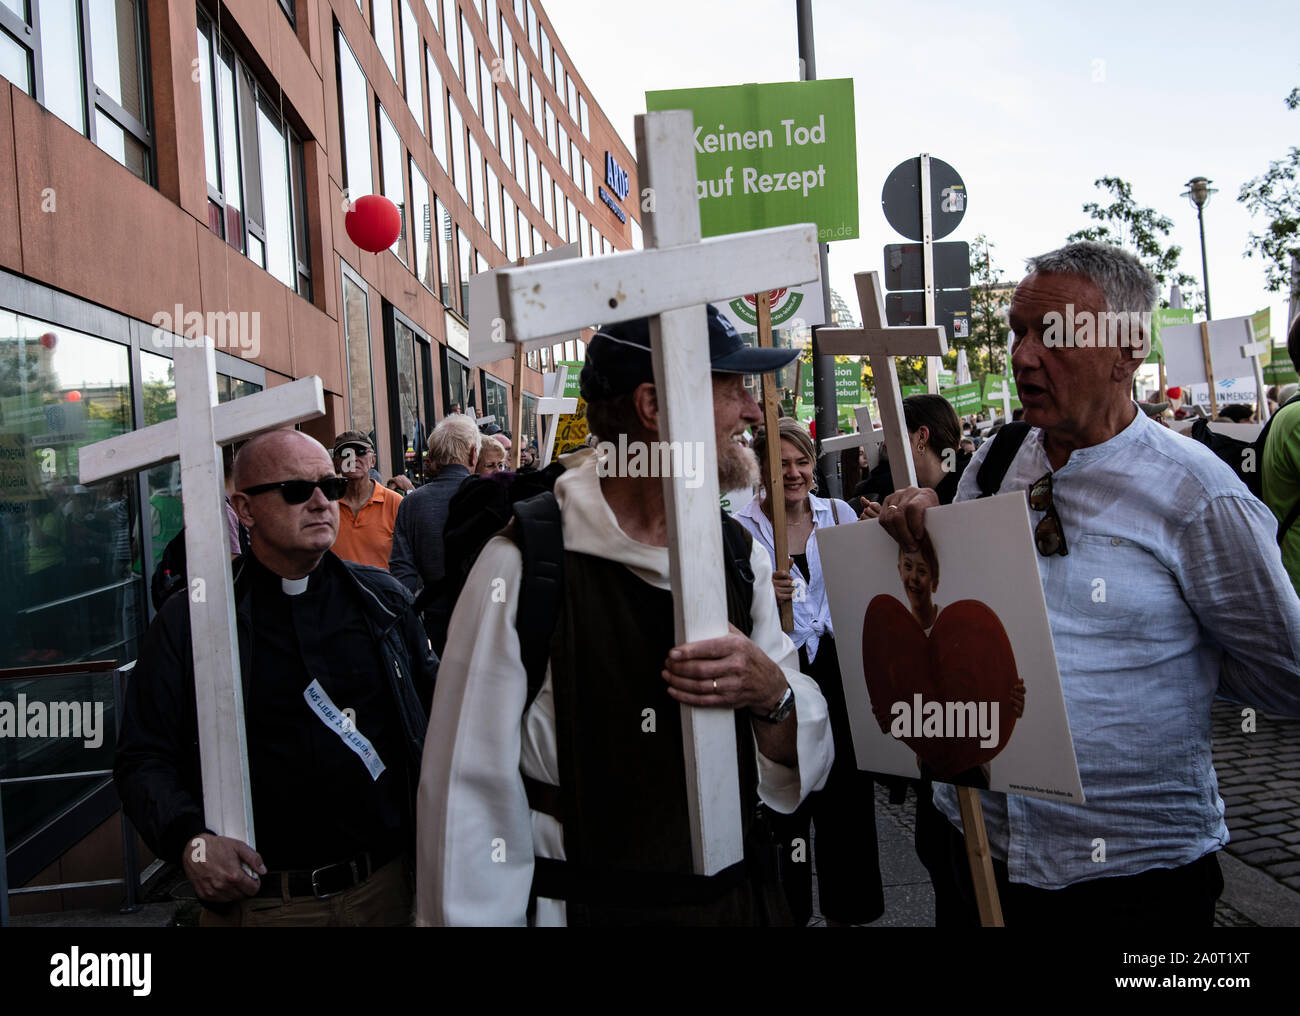 Berlin, Germany. 21st Sep, 2019. Participants of the so-called 'March for Life' hold posters and wooden crosses in the government district. According to the organizer, the association Bundesverband Lebensrecht, the Catholic Church, as well as doctors' and lawyers' associations participated in the 'March for Life'. Hundreds of people demonstrated in Berlin-Mitte against a demonstration by anti-abortion activists. Credit: Paul Zinken/dpa/Alamy Live News Stock Photo